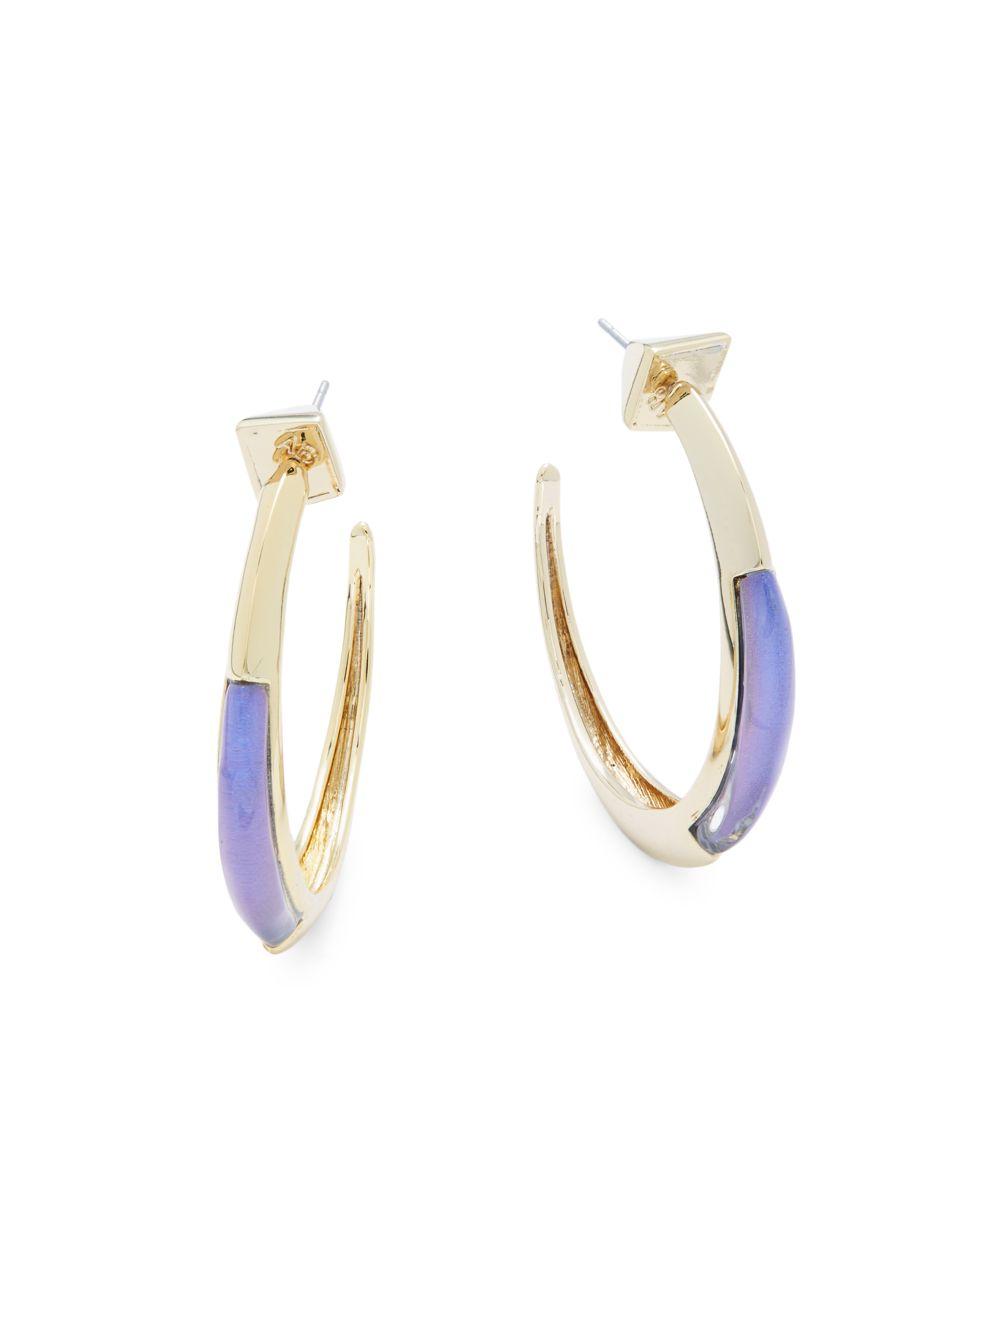 Alexis bittar Lucite 10k Gold-plated Crescent Hoop Earrings- 1.5in in ...